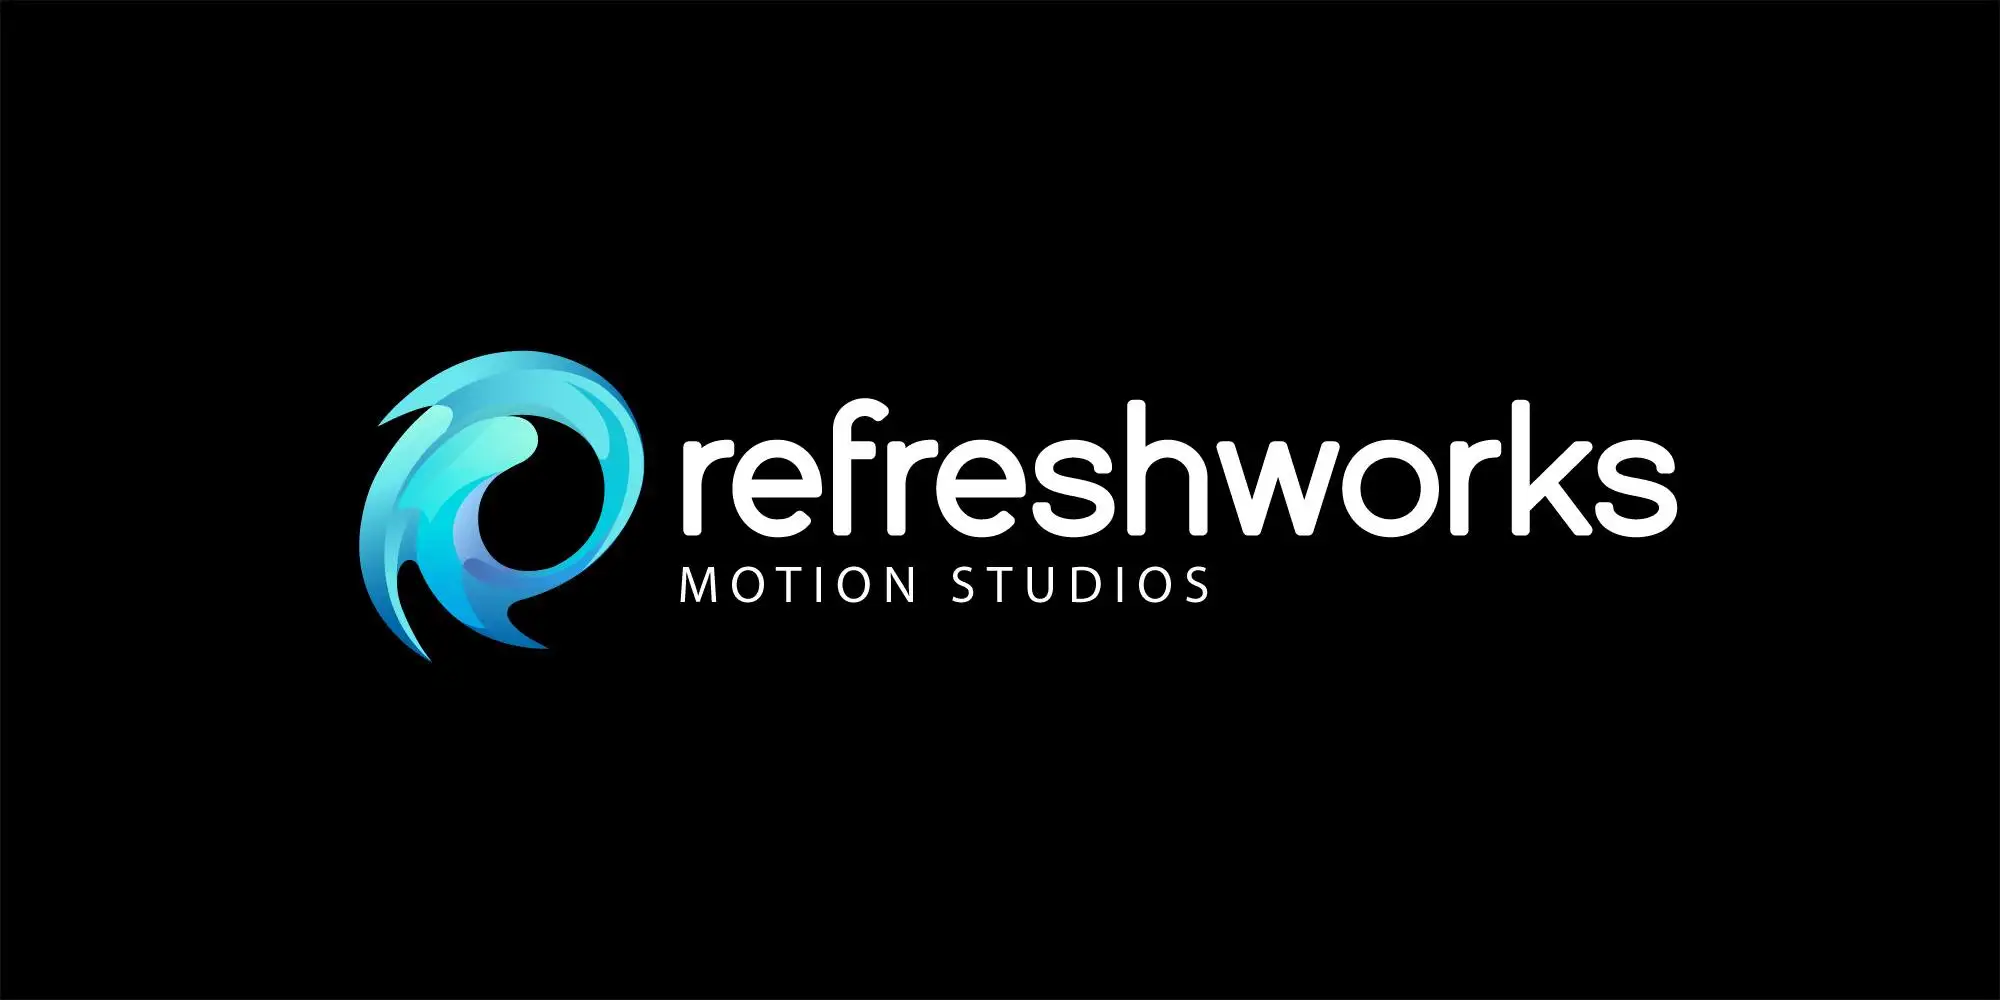 Refreshworks Raises €750K to Accelerate AI in Dutch Businesses